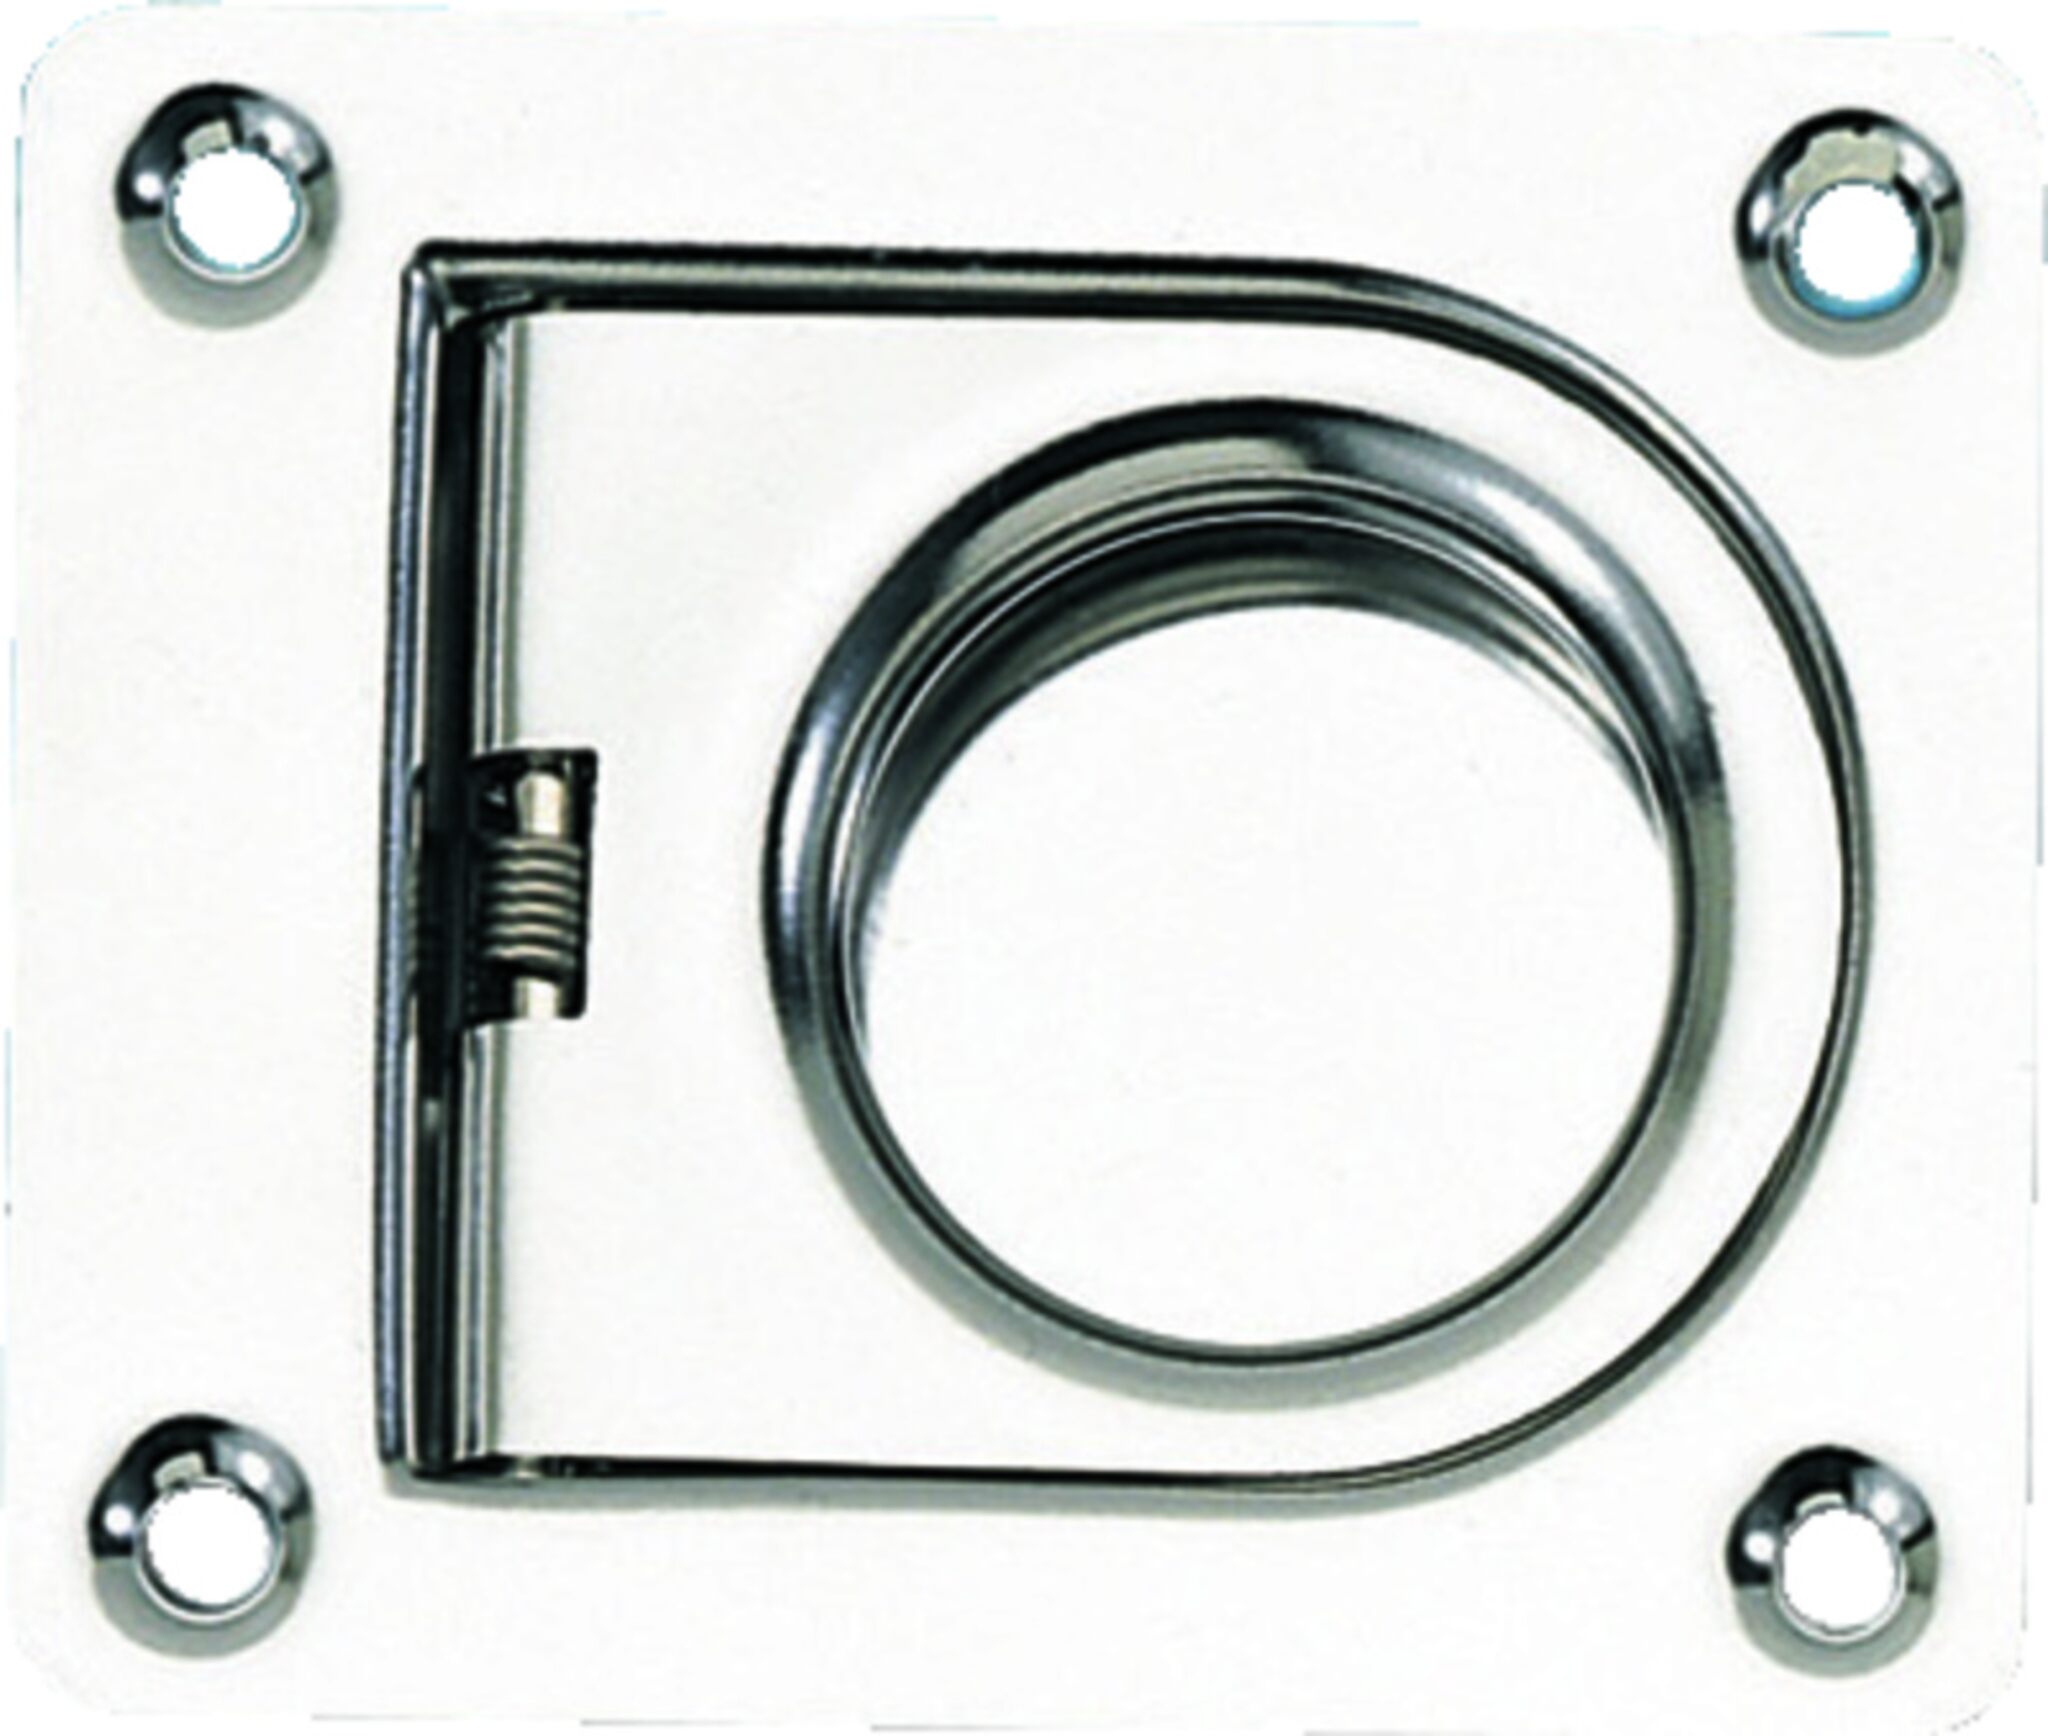 Stainless steel inlet handle